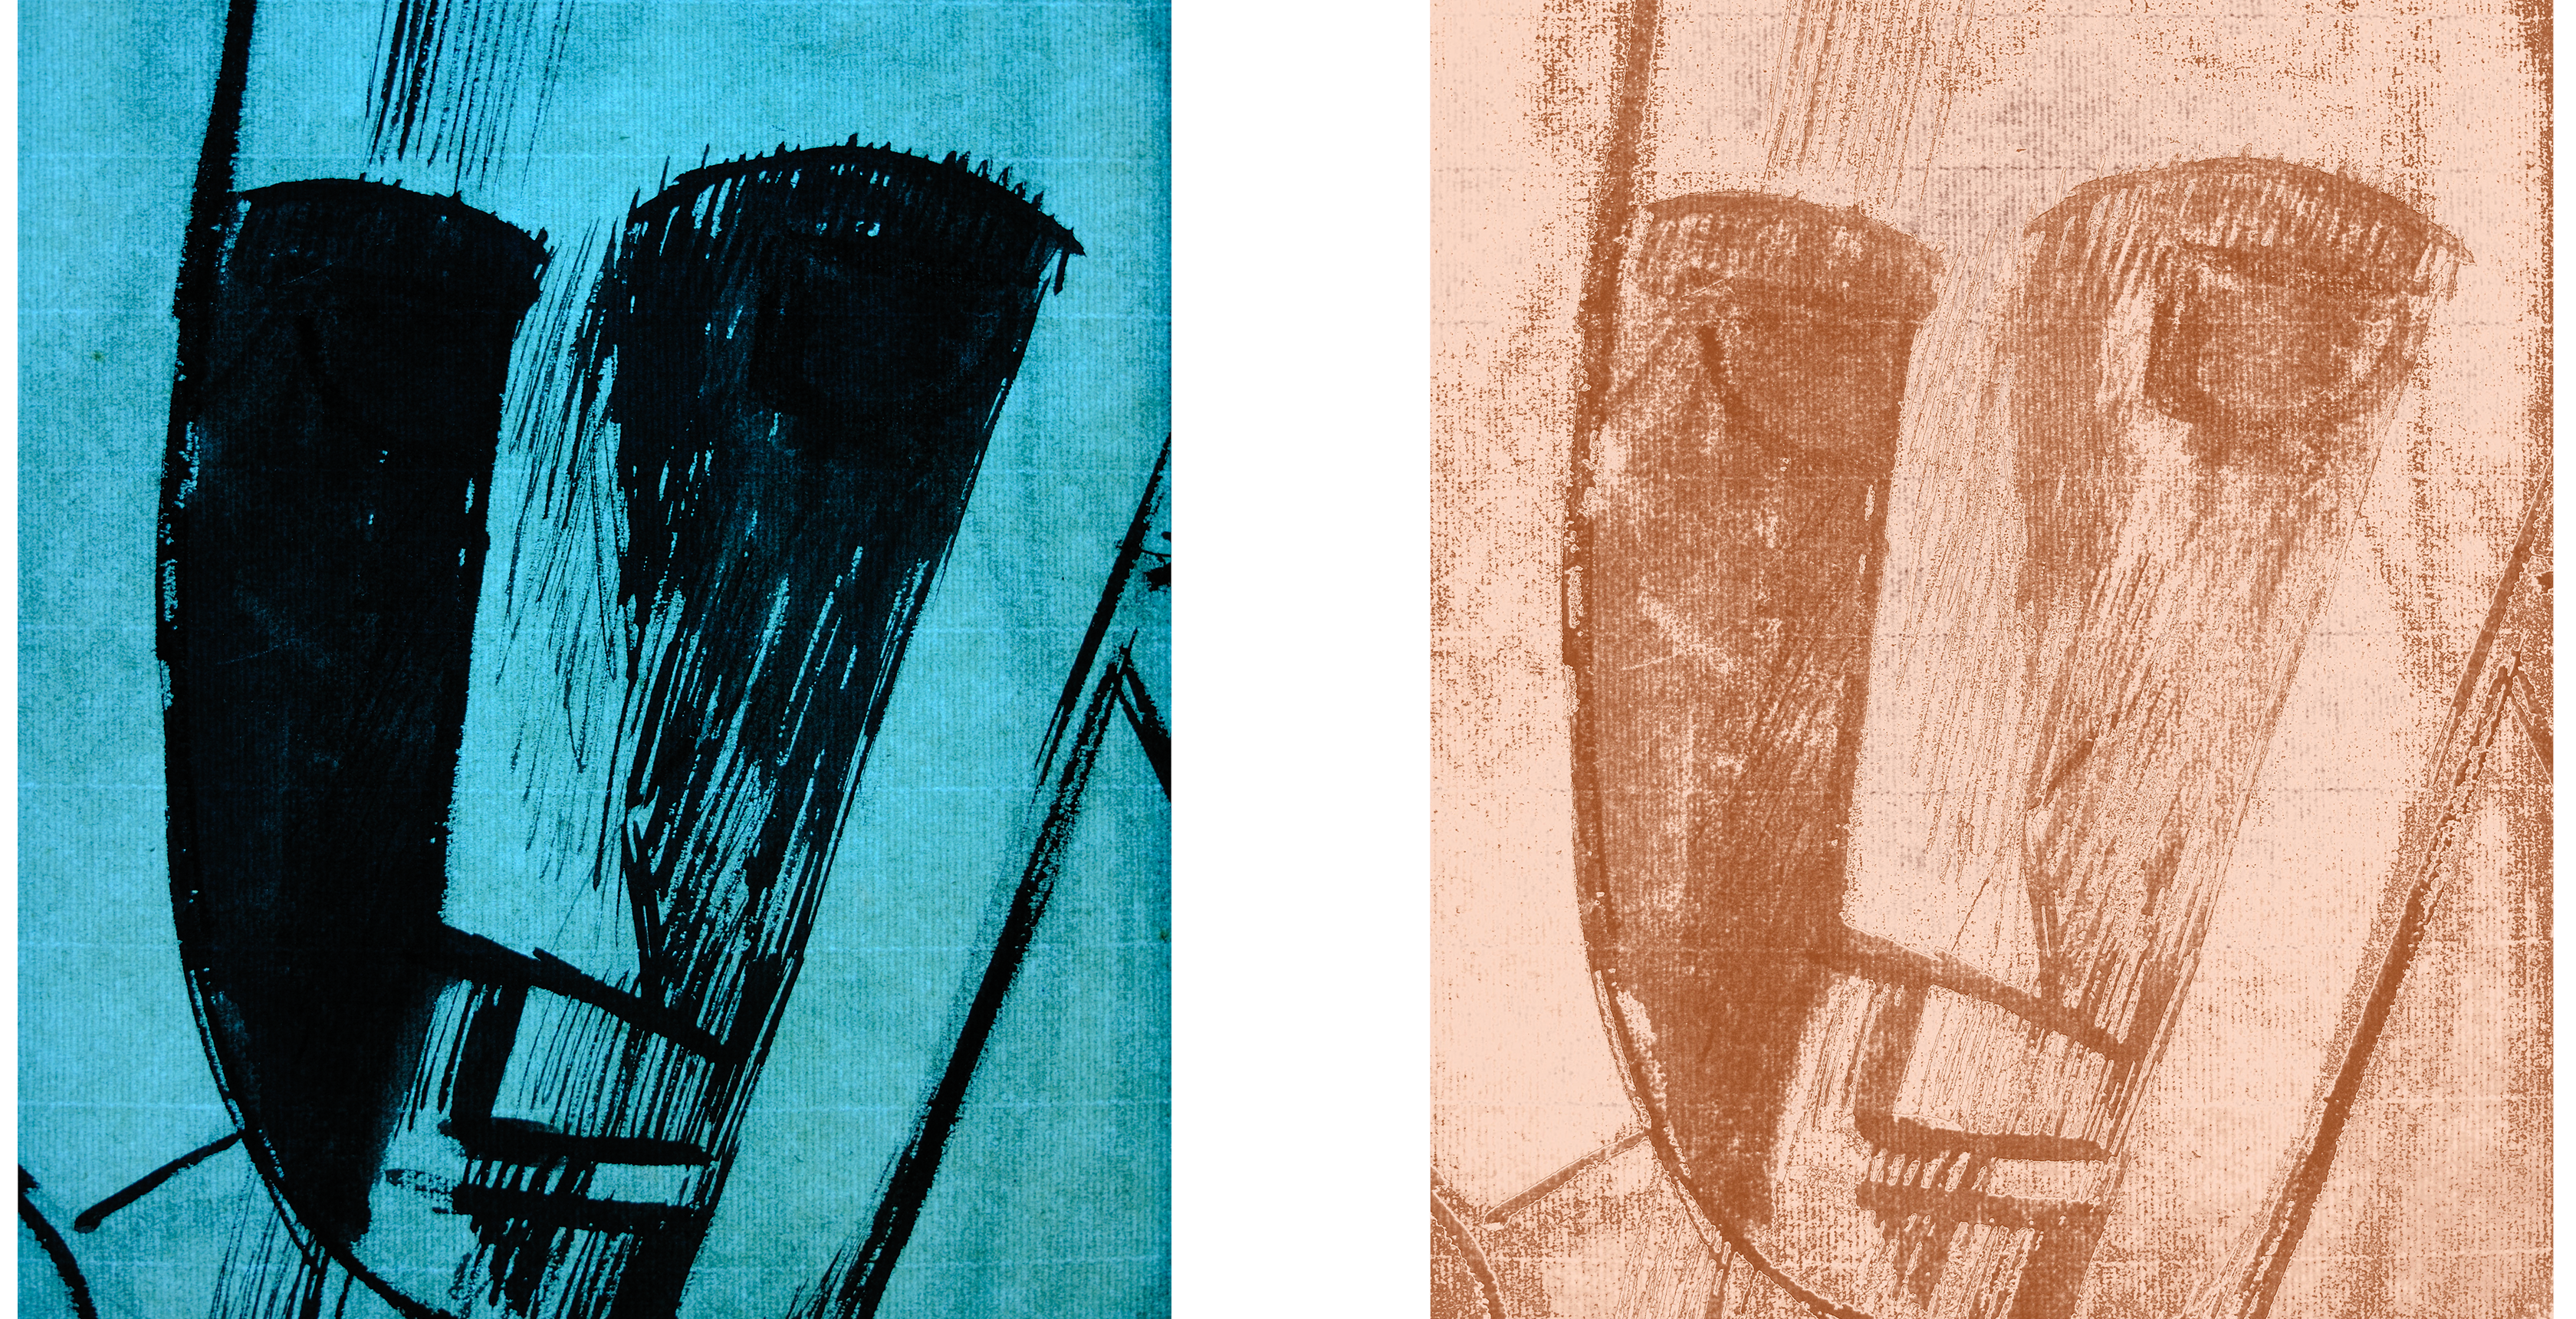 (Left) Head of a Man tinted in blue transmitted light showing more of the artist’s linework (Right) Head of a Man tinted in orange with visibly open eyes